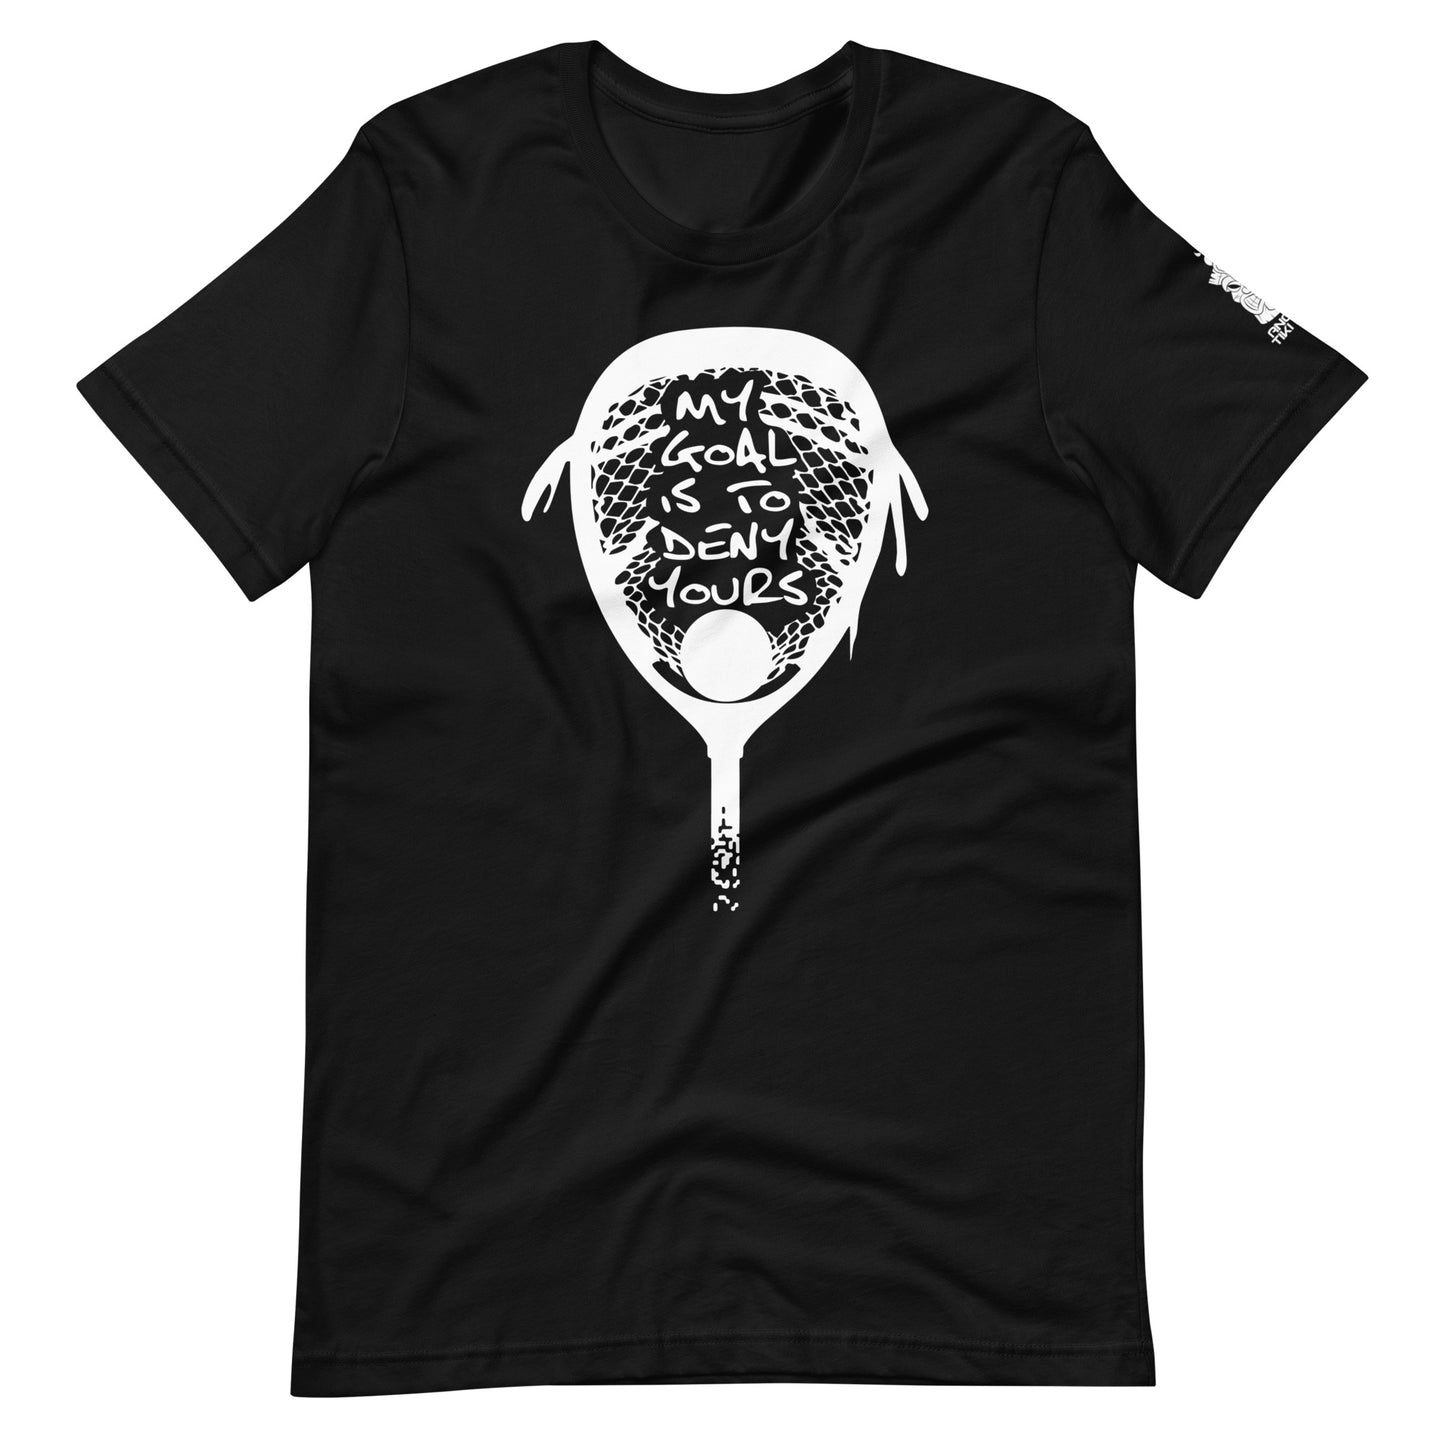 My goal is to deny yours lacrosse Unisex t-shirt